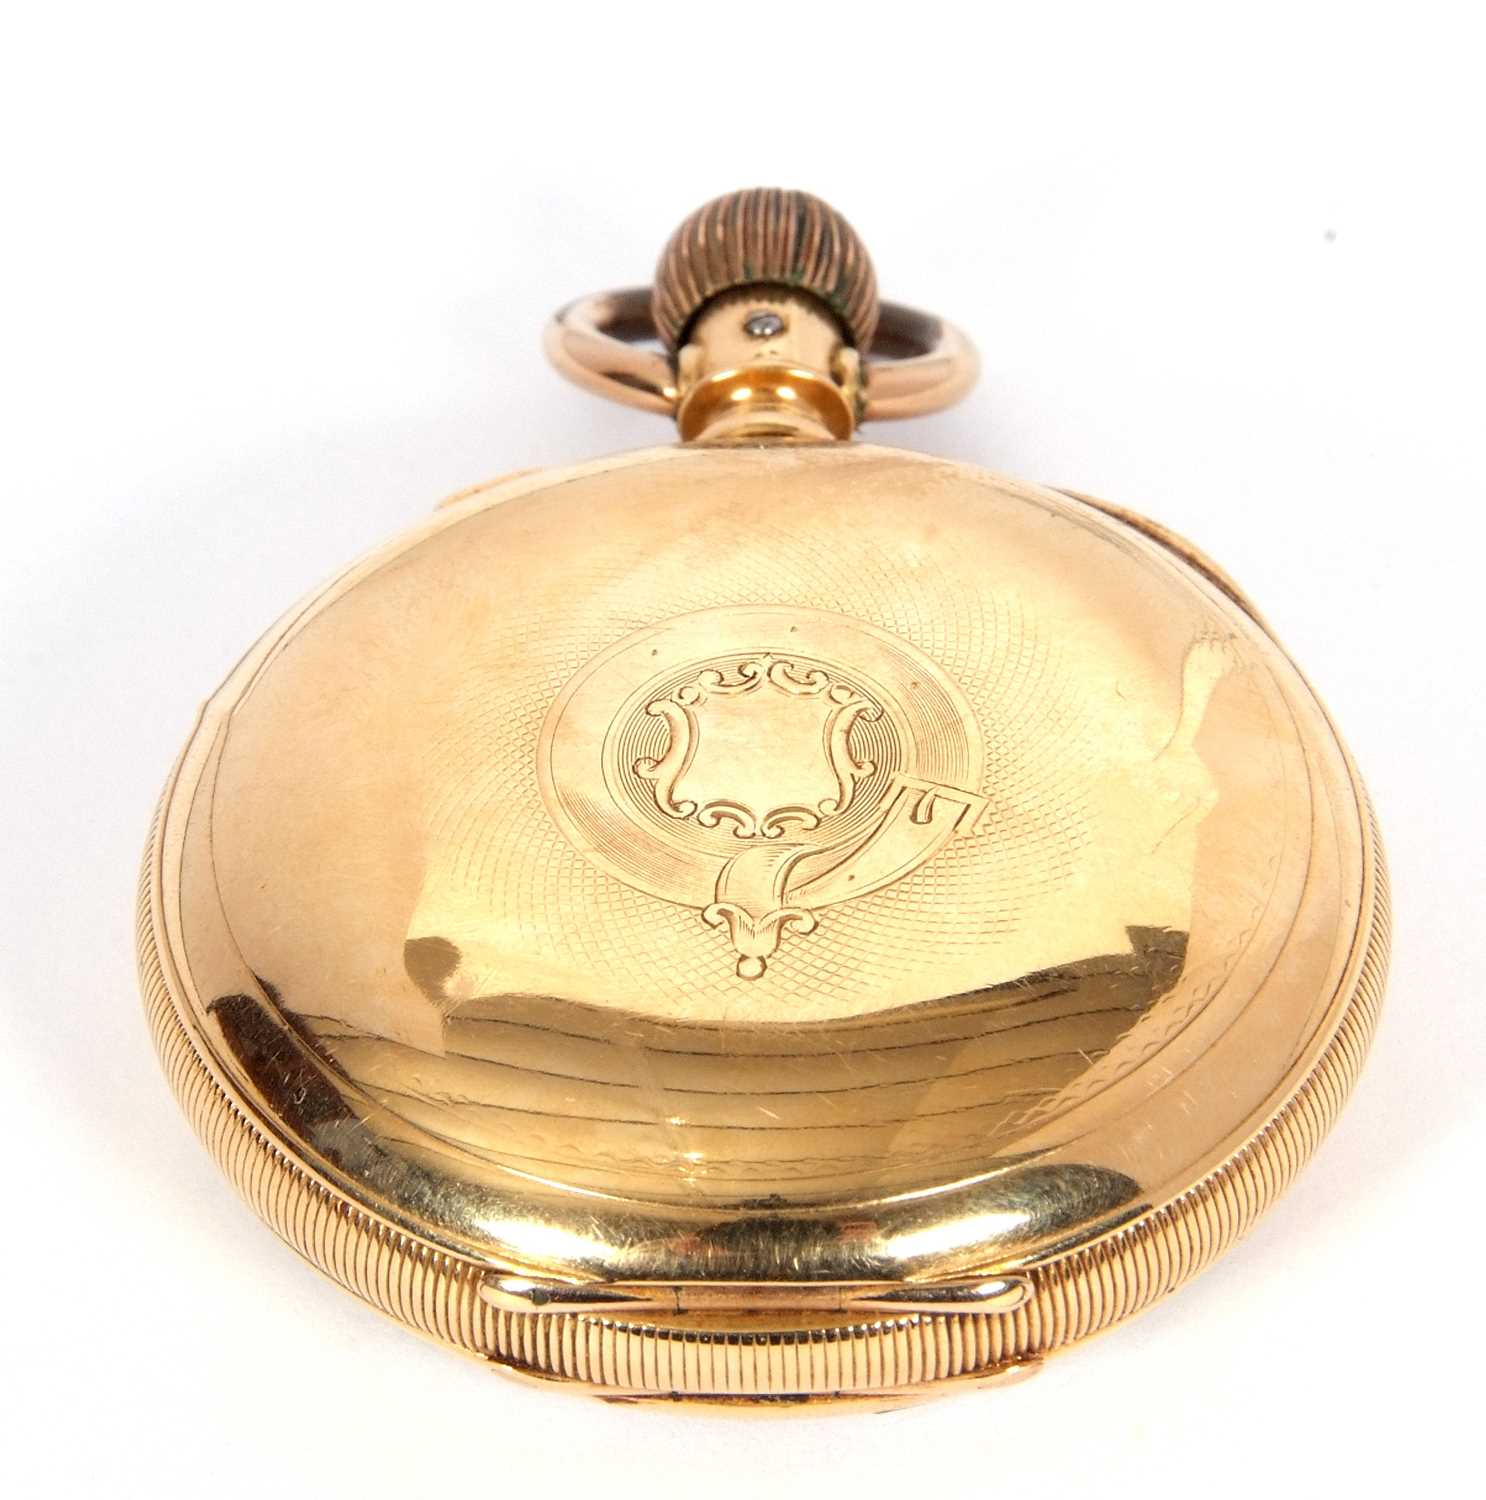 Waltham yellow metal chronograph pocket watch stamped 18k in the case back, it has a white enamel - Image 2 of 7